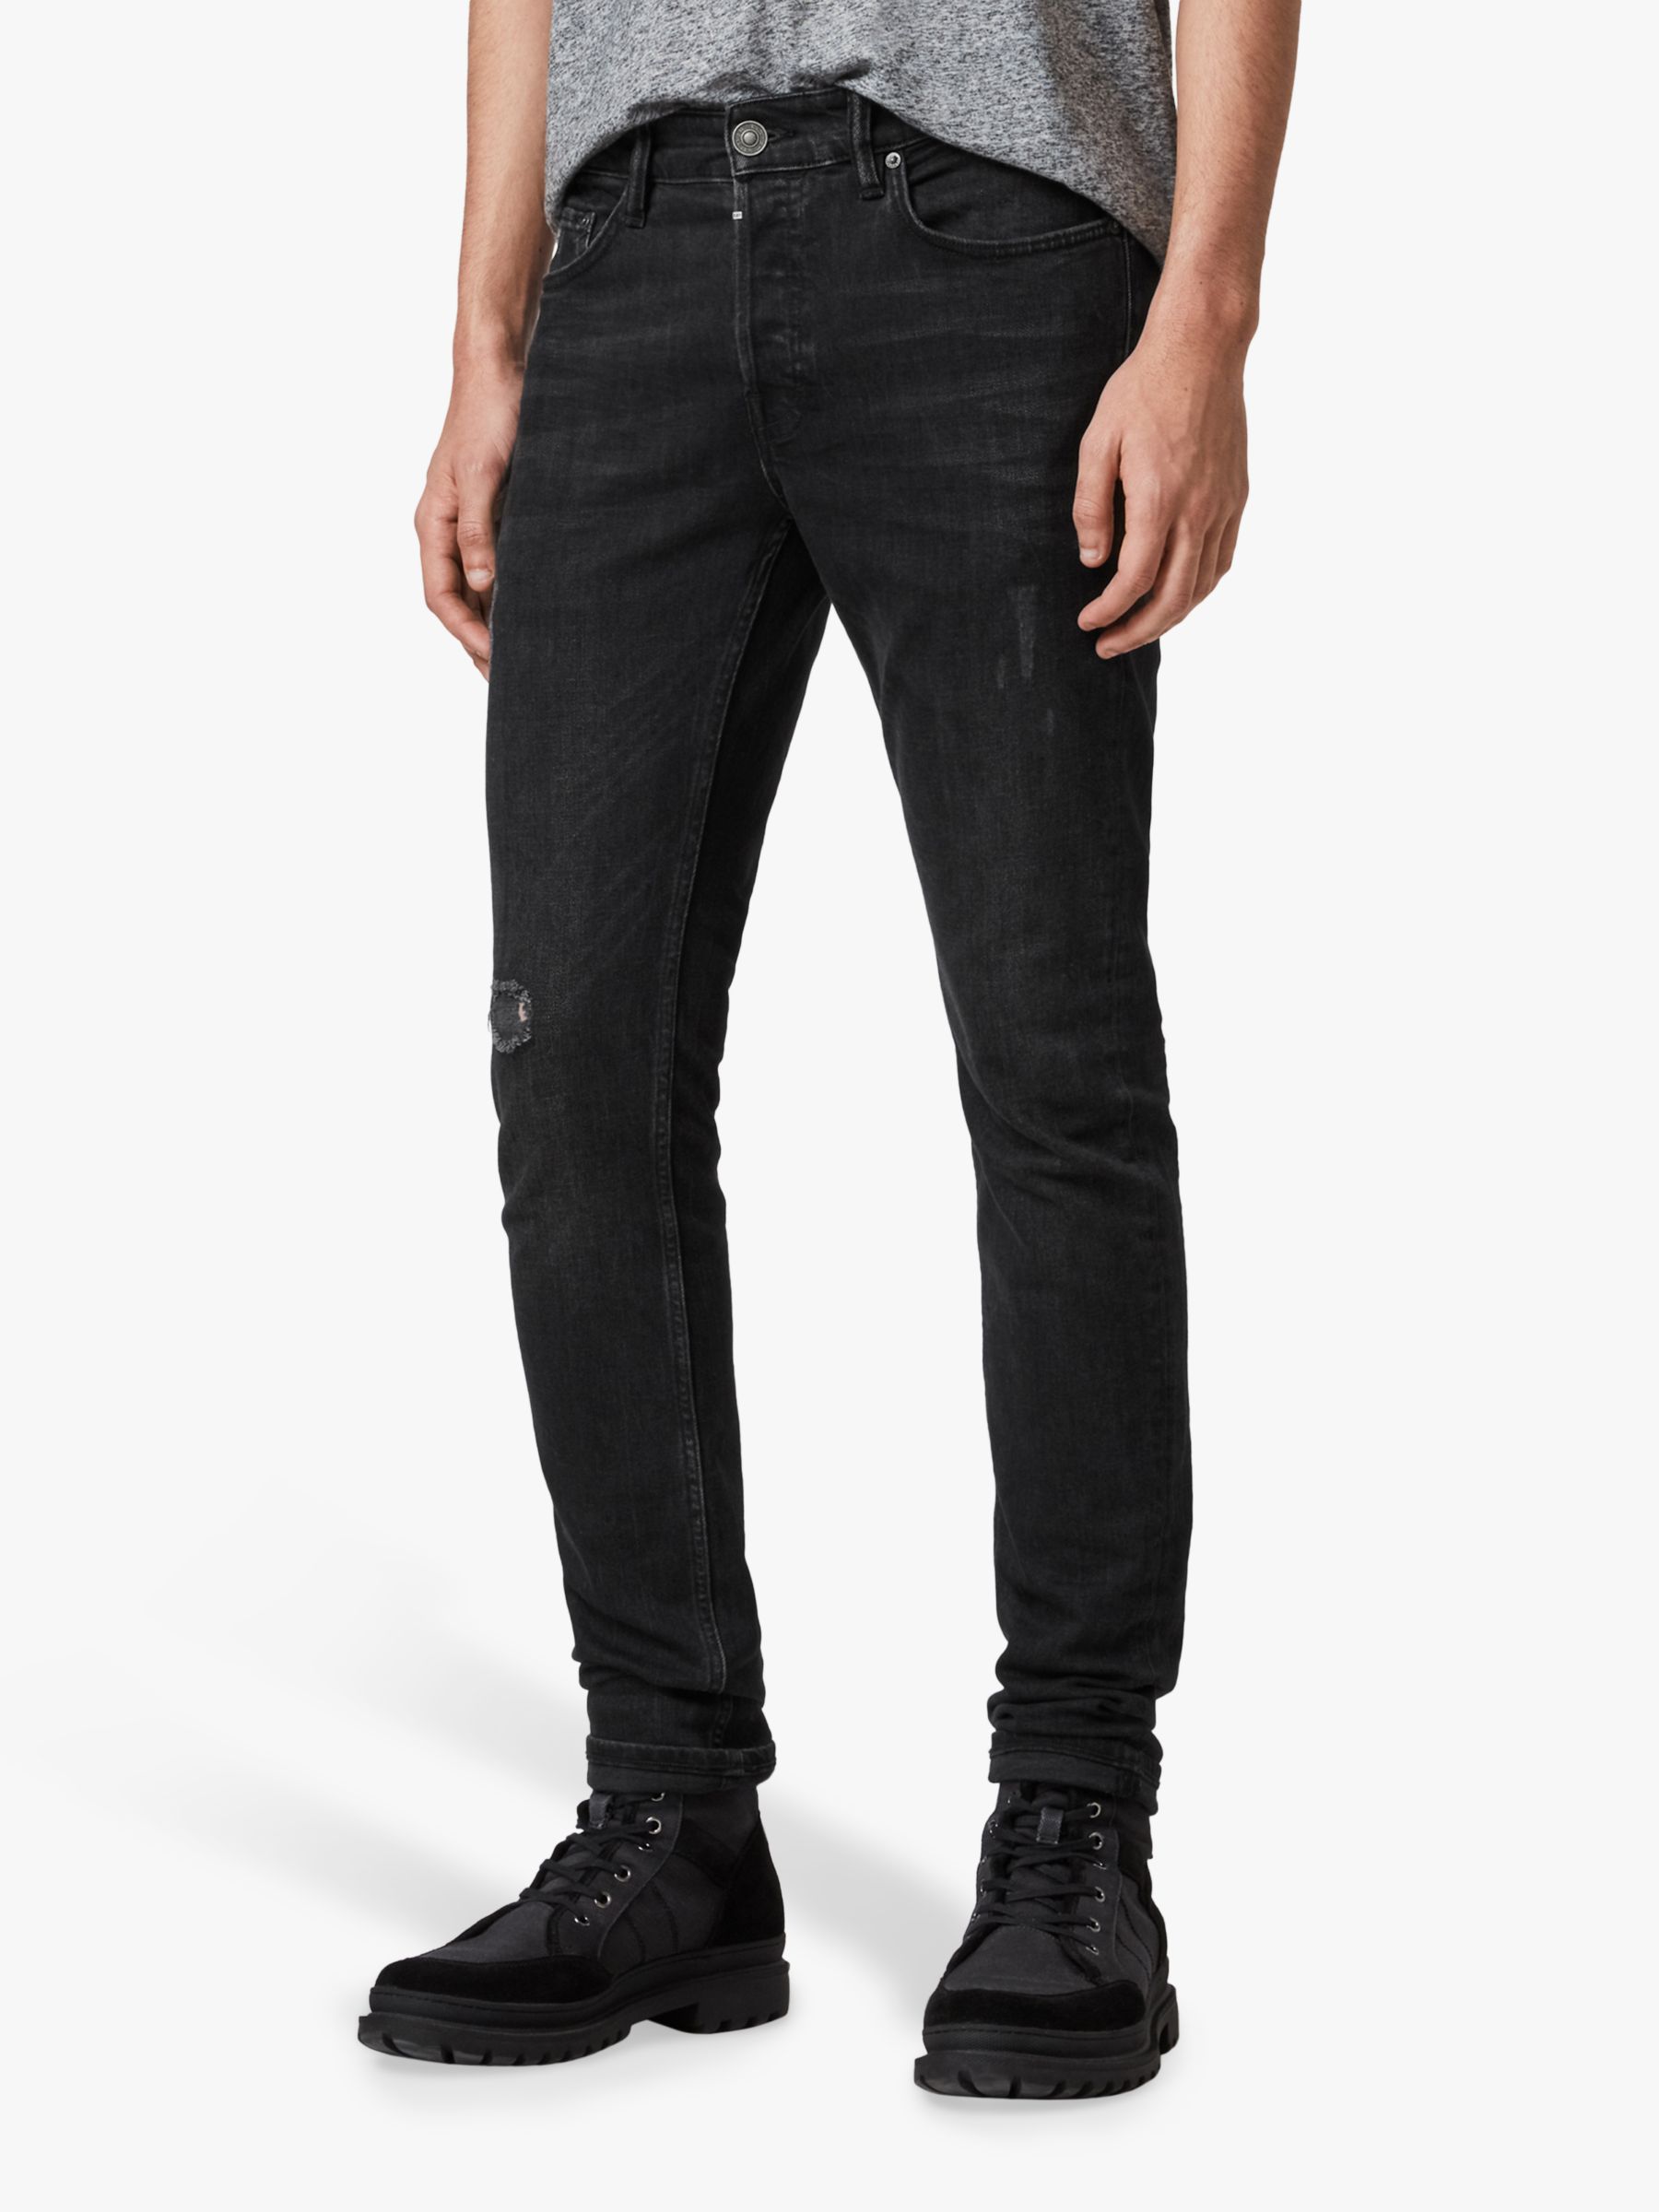 AllSaints Rex Straight Skinny Fit Jeans, Washed Black, 30R